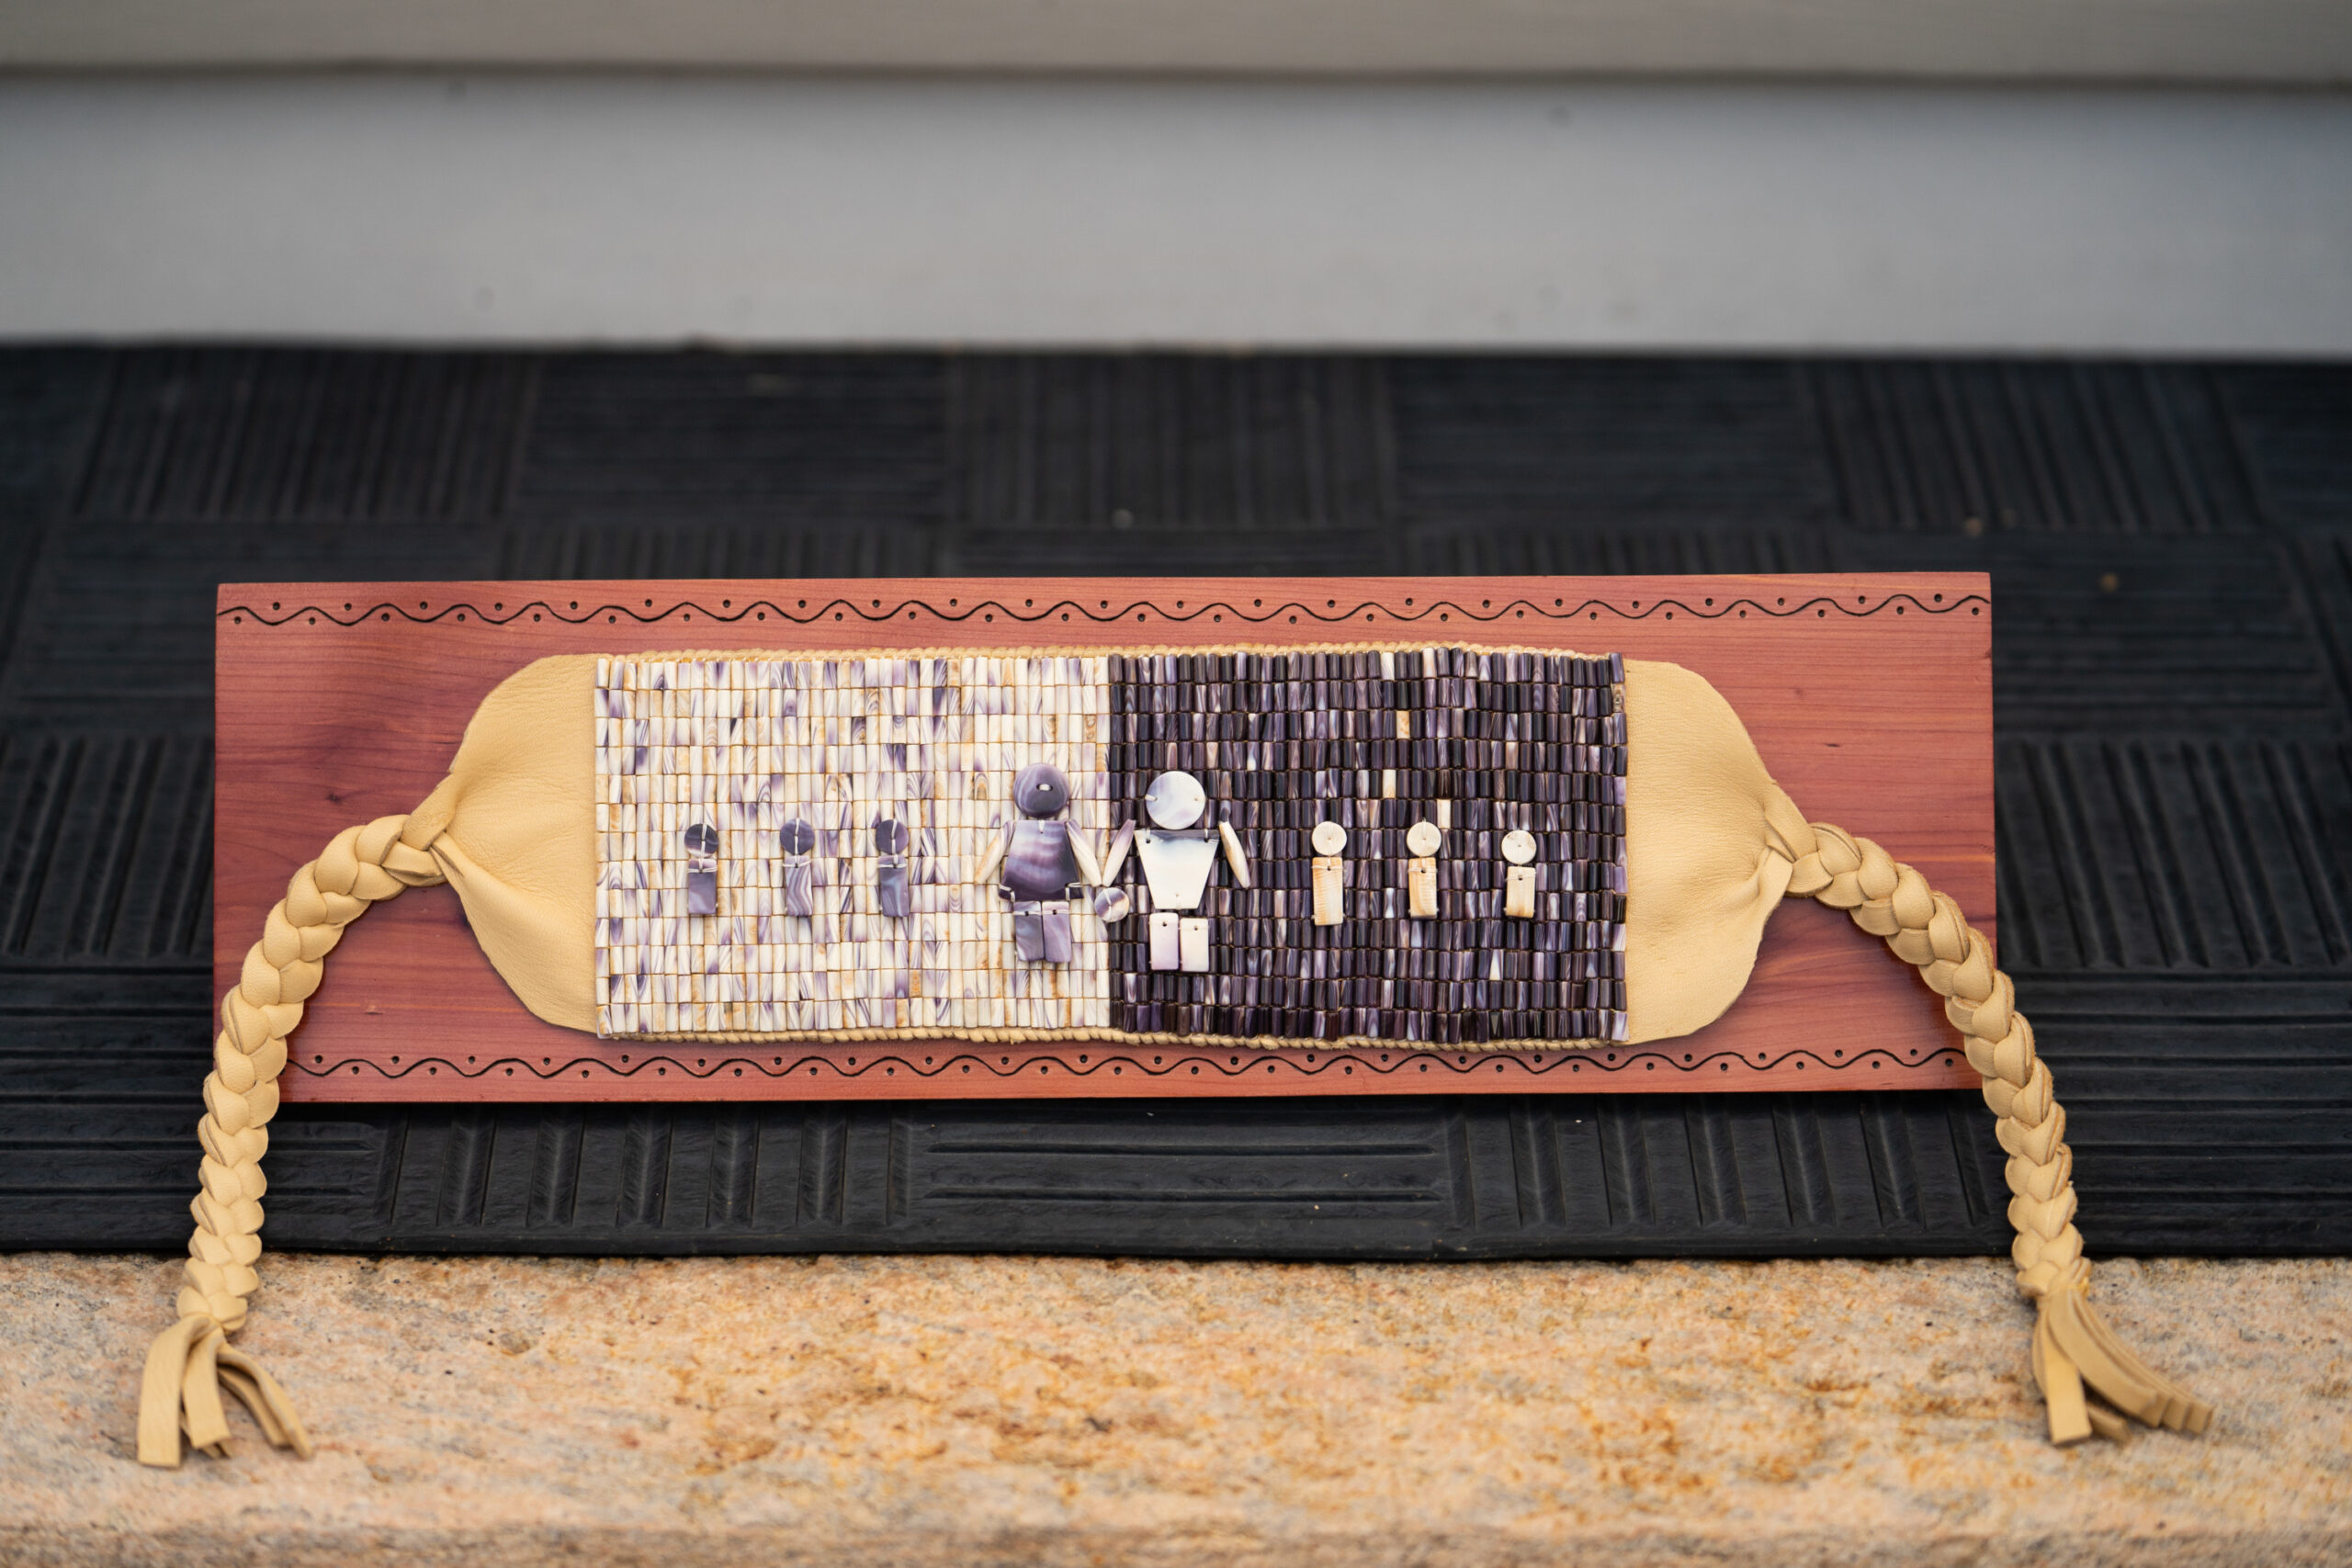 Wampum belt created by the Mohegan Tribe